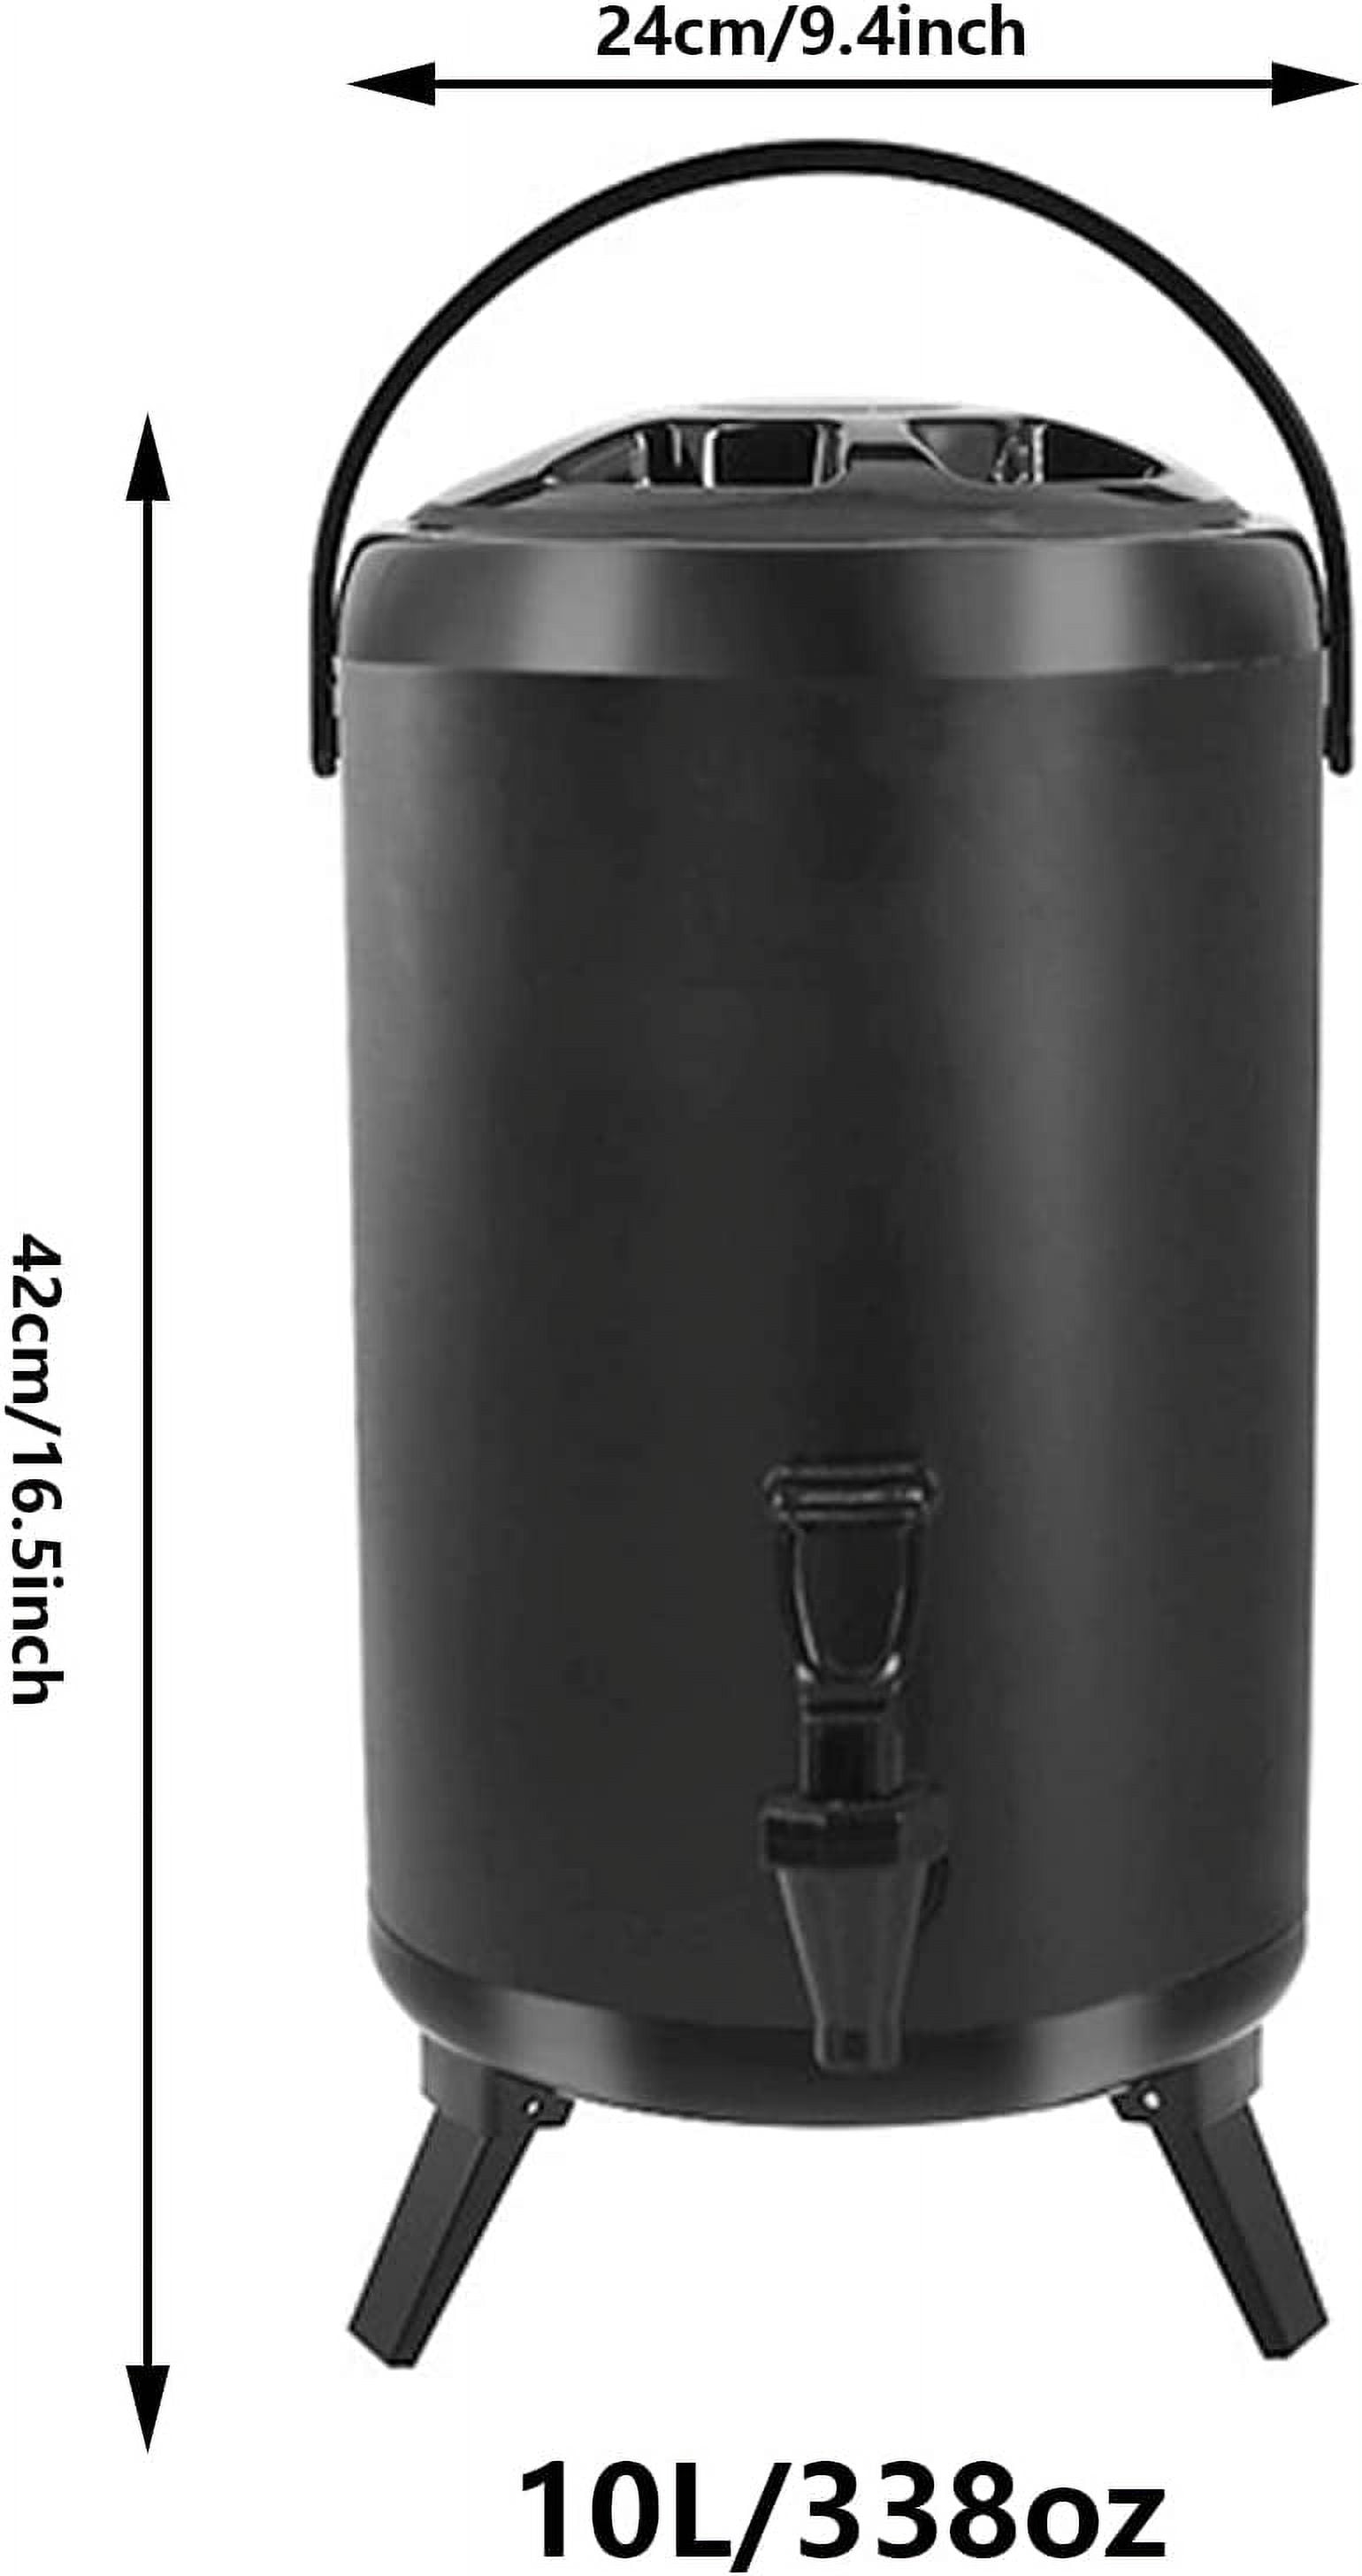 Stainless Steel Insulated Beverage Coffee Dispenser 12  Liter/3.1 Gallon Party Insulated Thermal Hot and Cold Beverage Dispenser  for Serving Halloween Tea, Coffee, Milk, Water, Juice, Soup: Iced Beverage  Dispensers